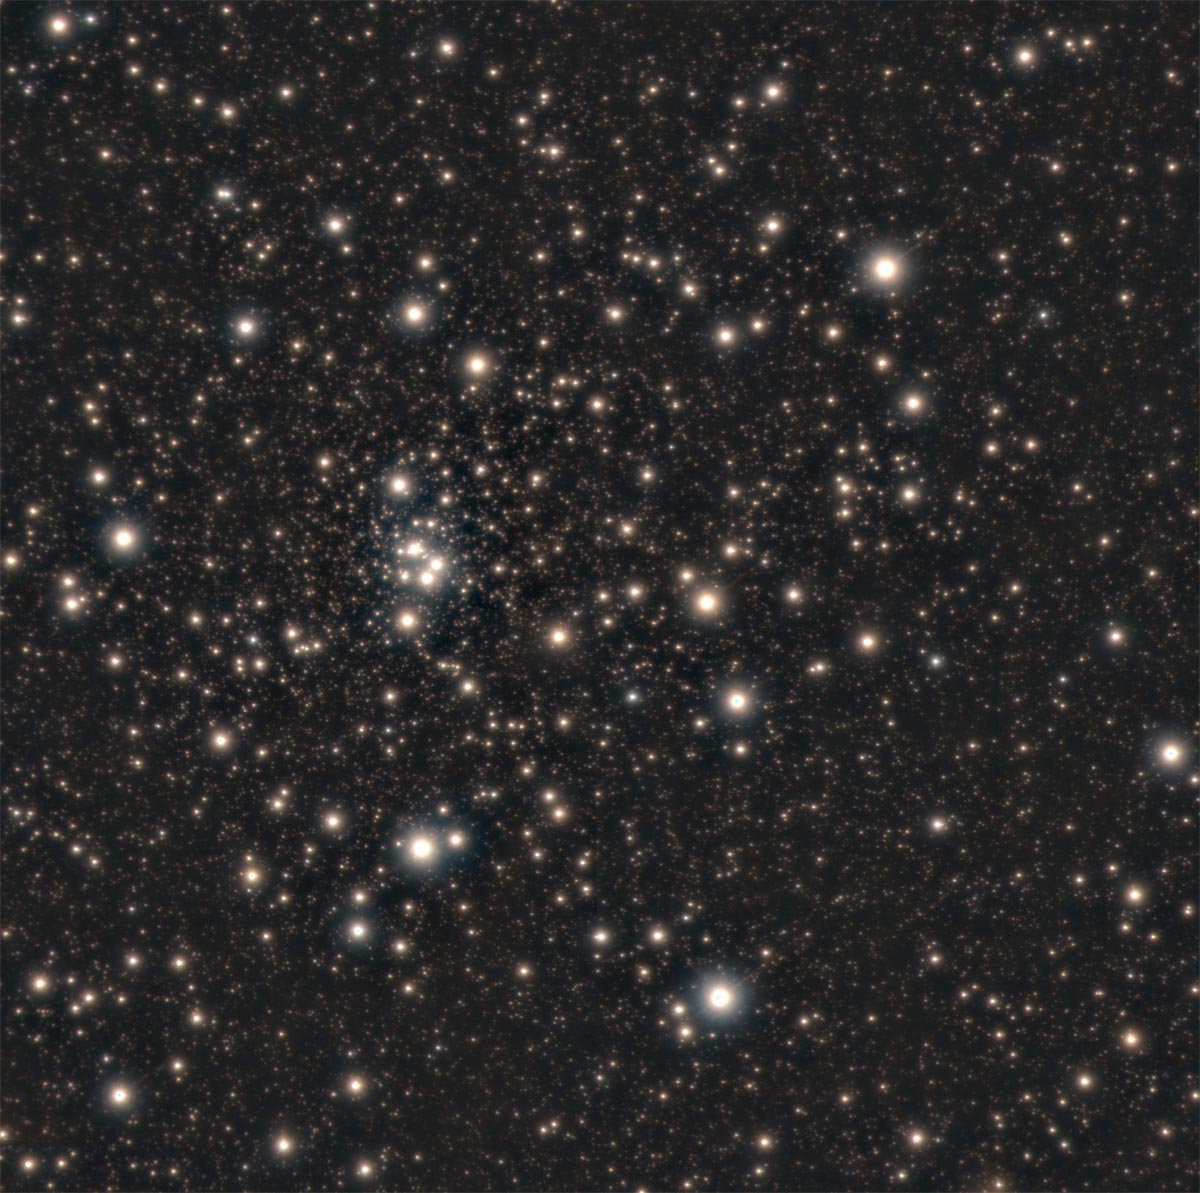 Color composite GSAOI+GeMS image of HP 1 obtained using the Gemini South telescope in Chile